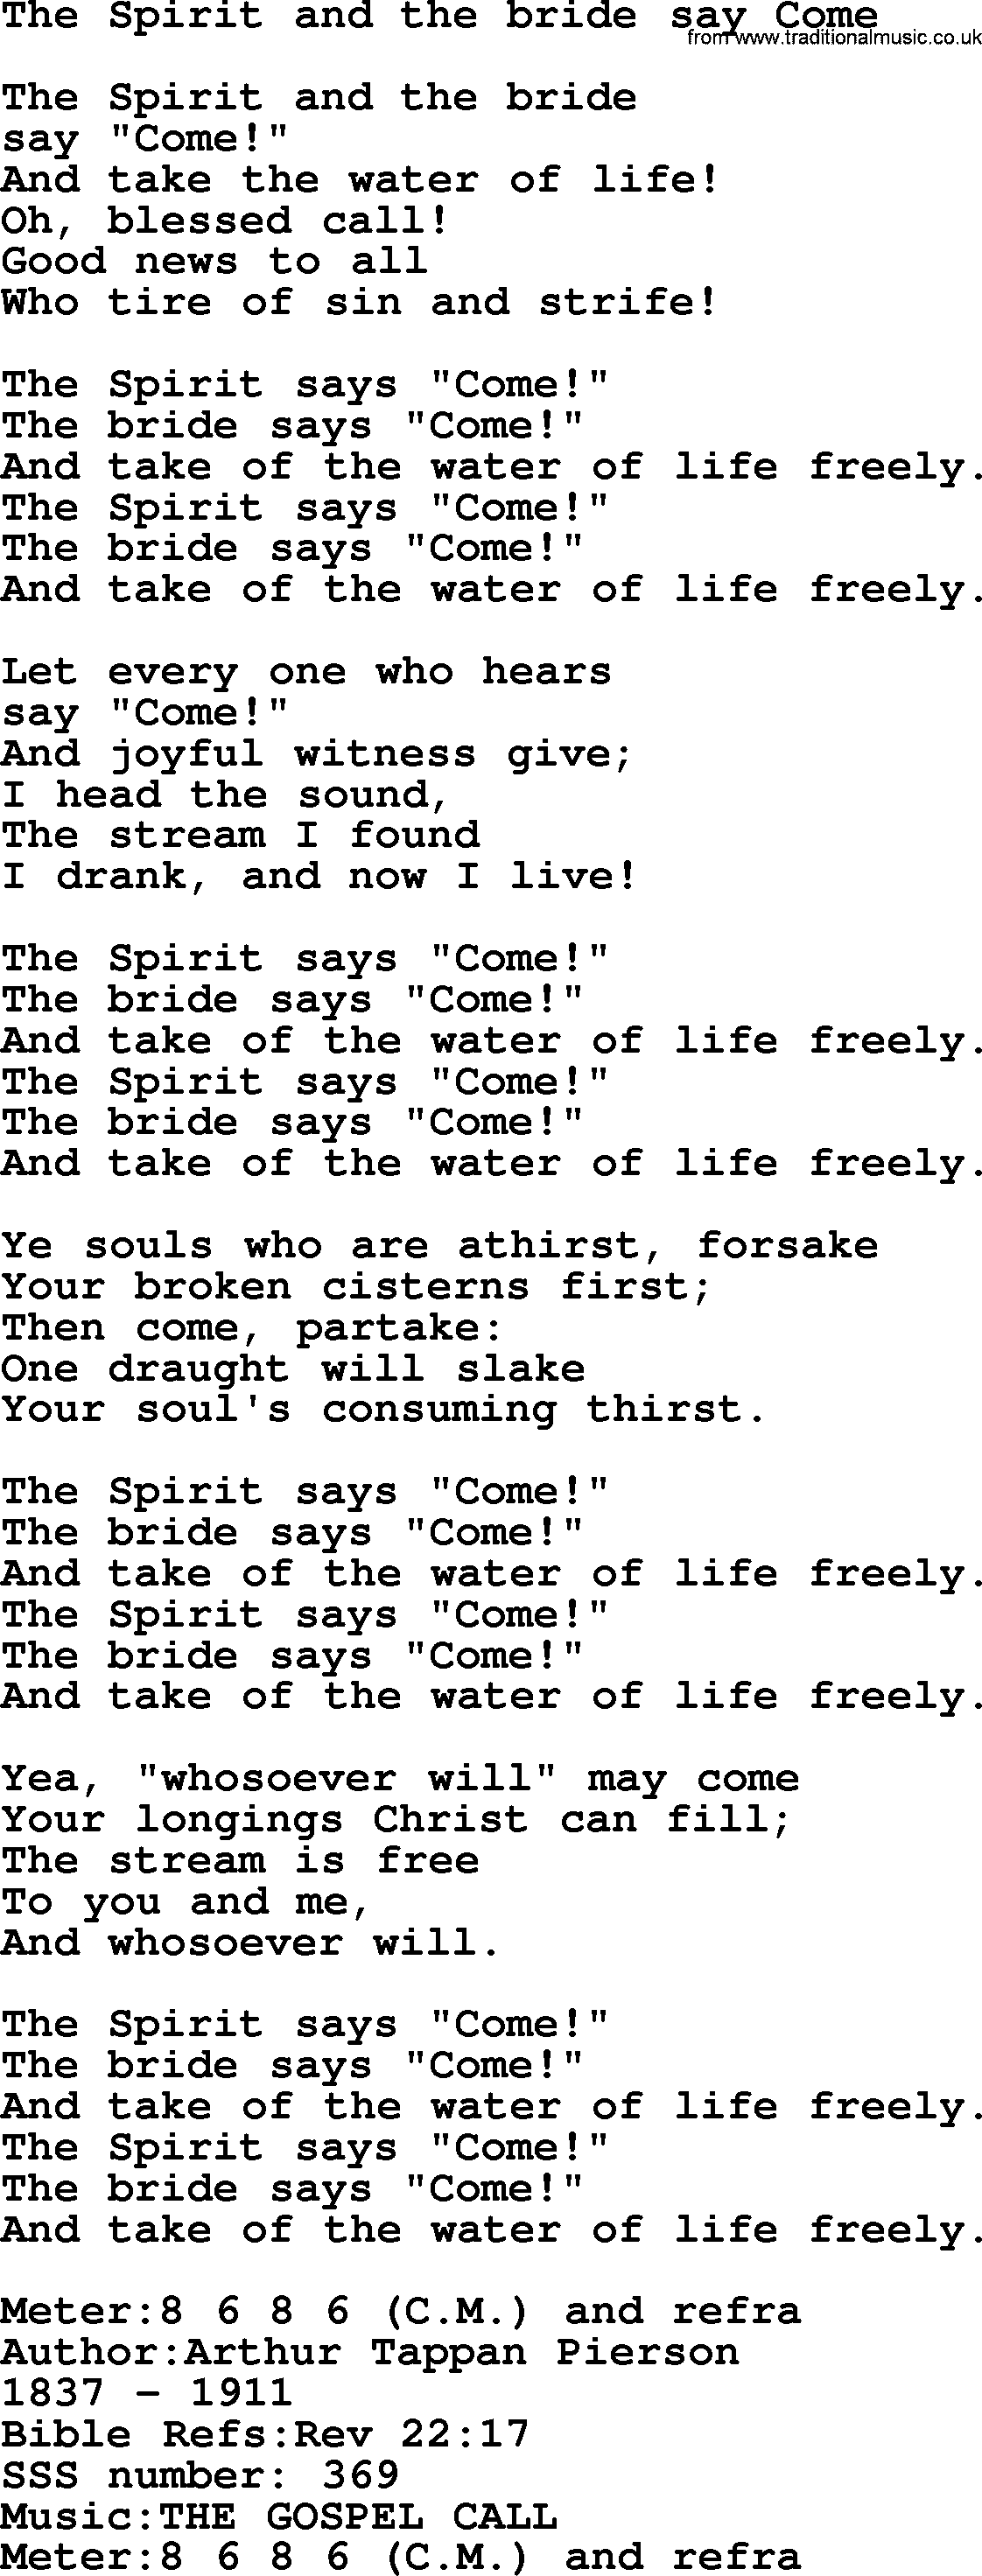 Sacred Songs and Solos complete, 1200 Hymns, title: The Spirit And The Bride Say Come, lyrics and PDF